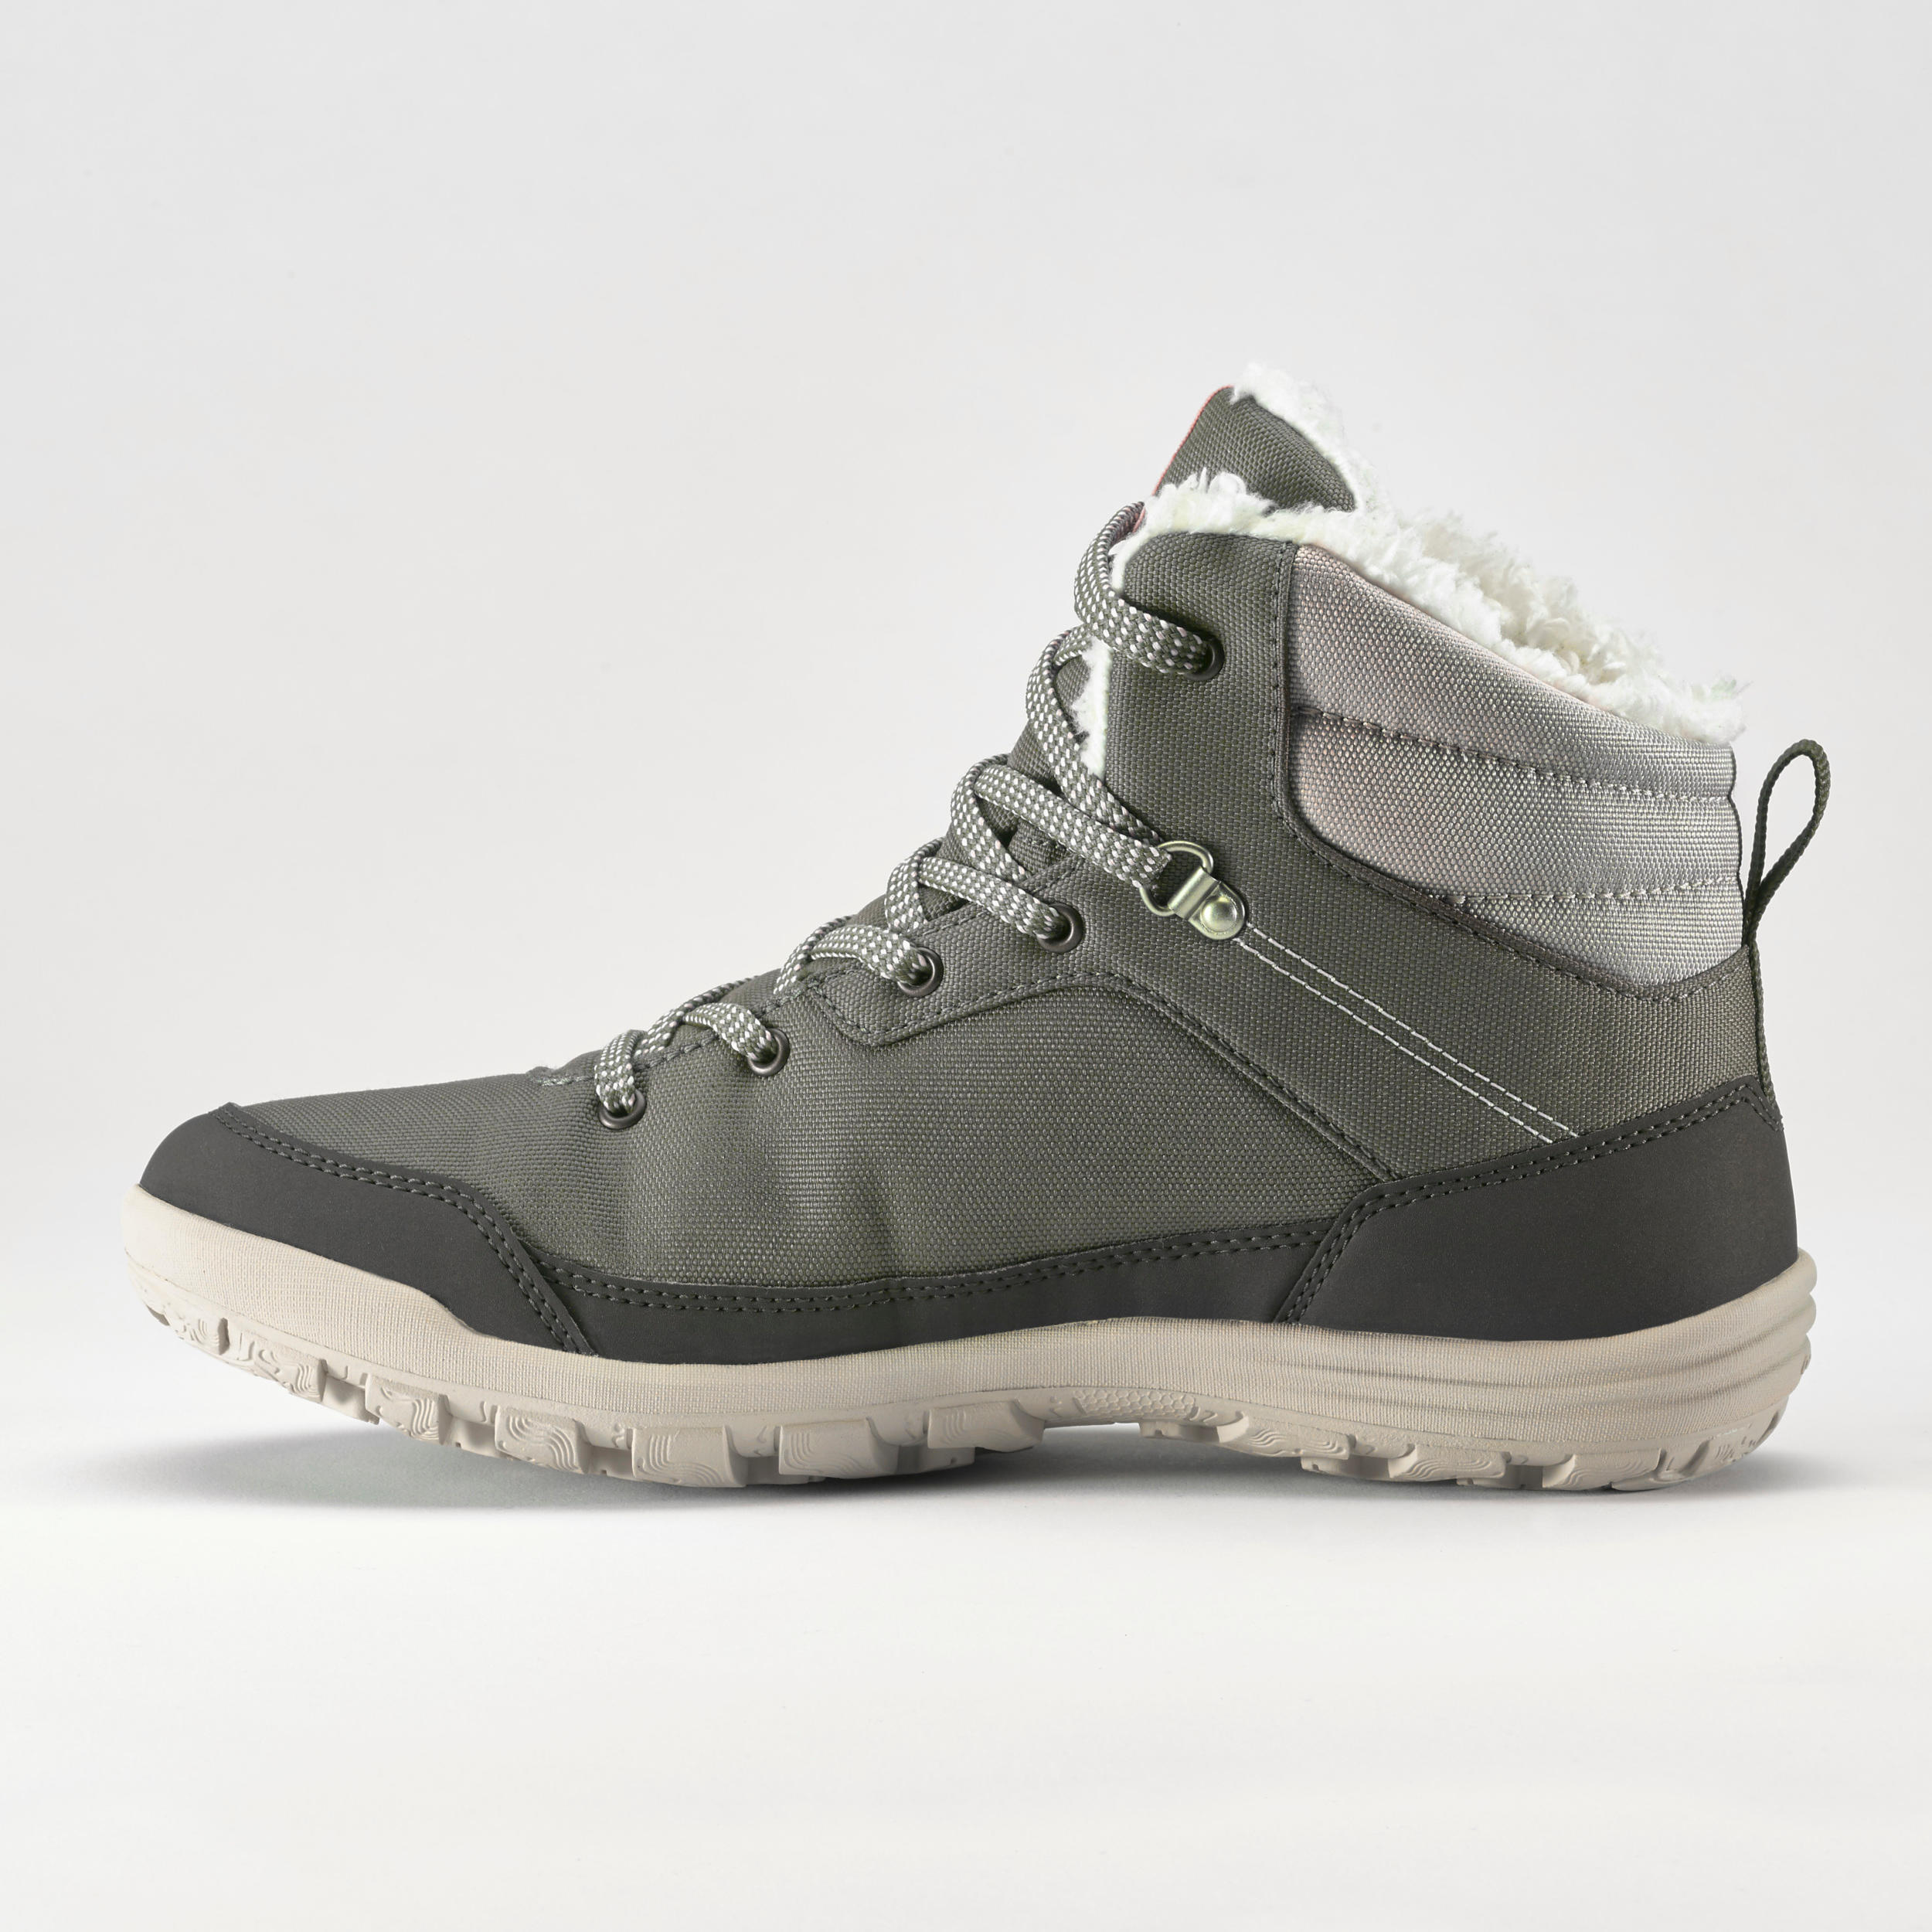 Women’s Warm and Waterproof Hiking Boots - SH100 MID 2/7